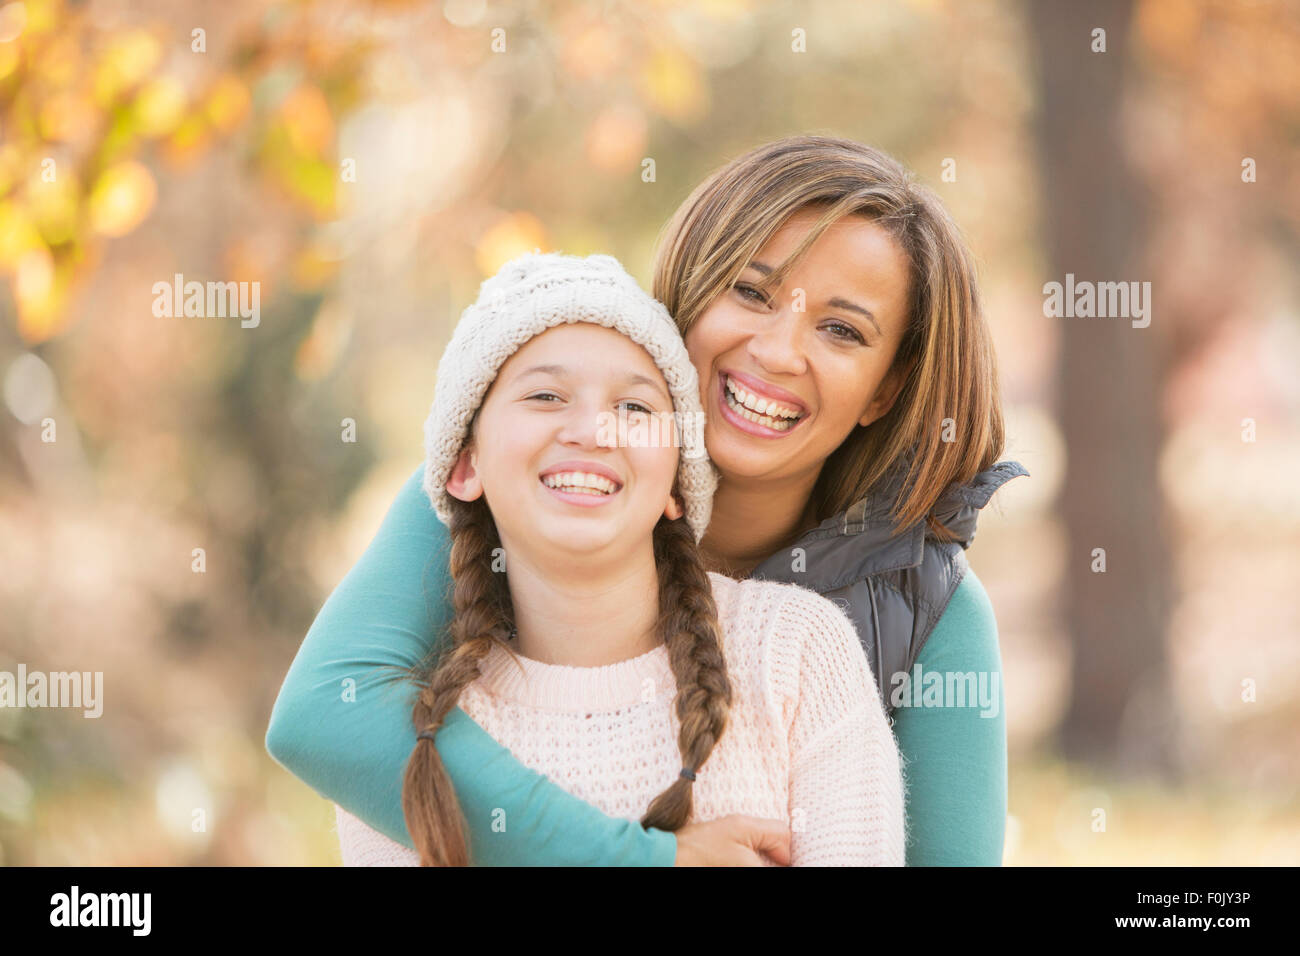 Portrait enthusiastic mother and daughter hugging outdoors Stock Photo